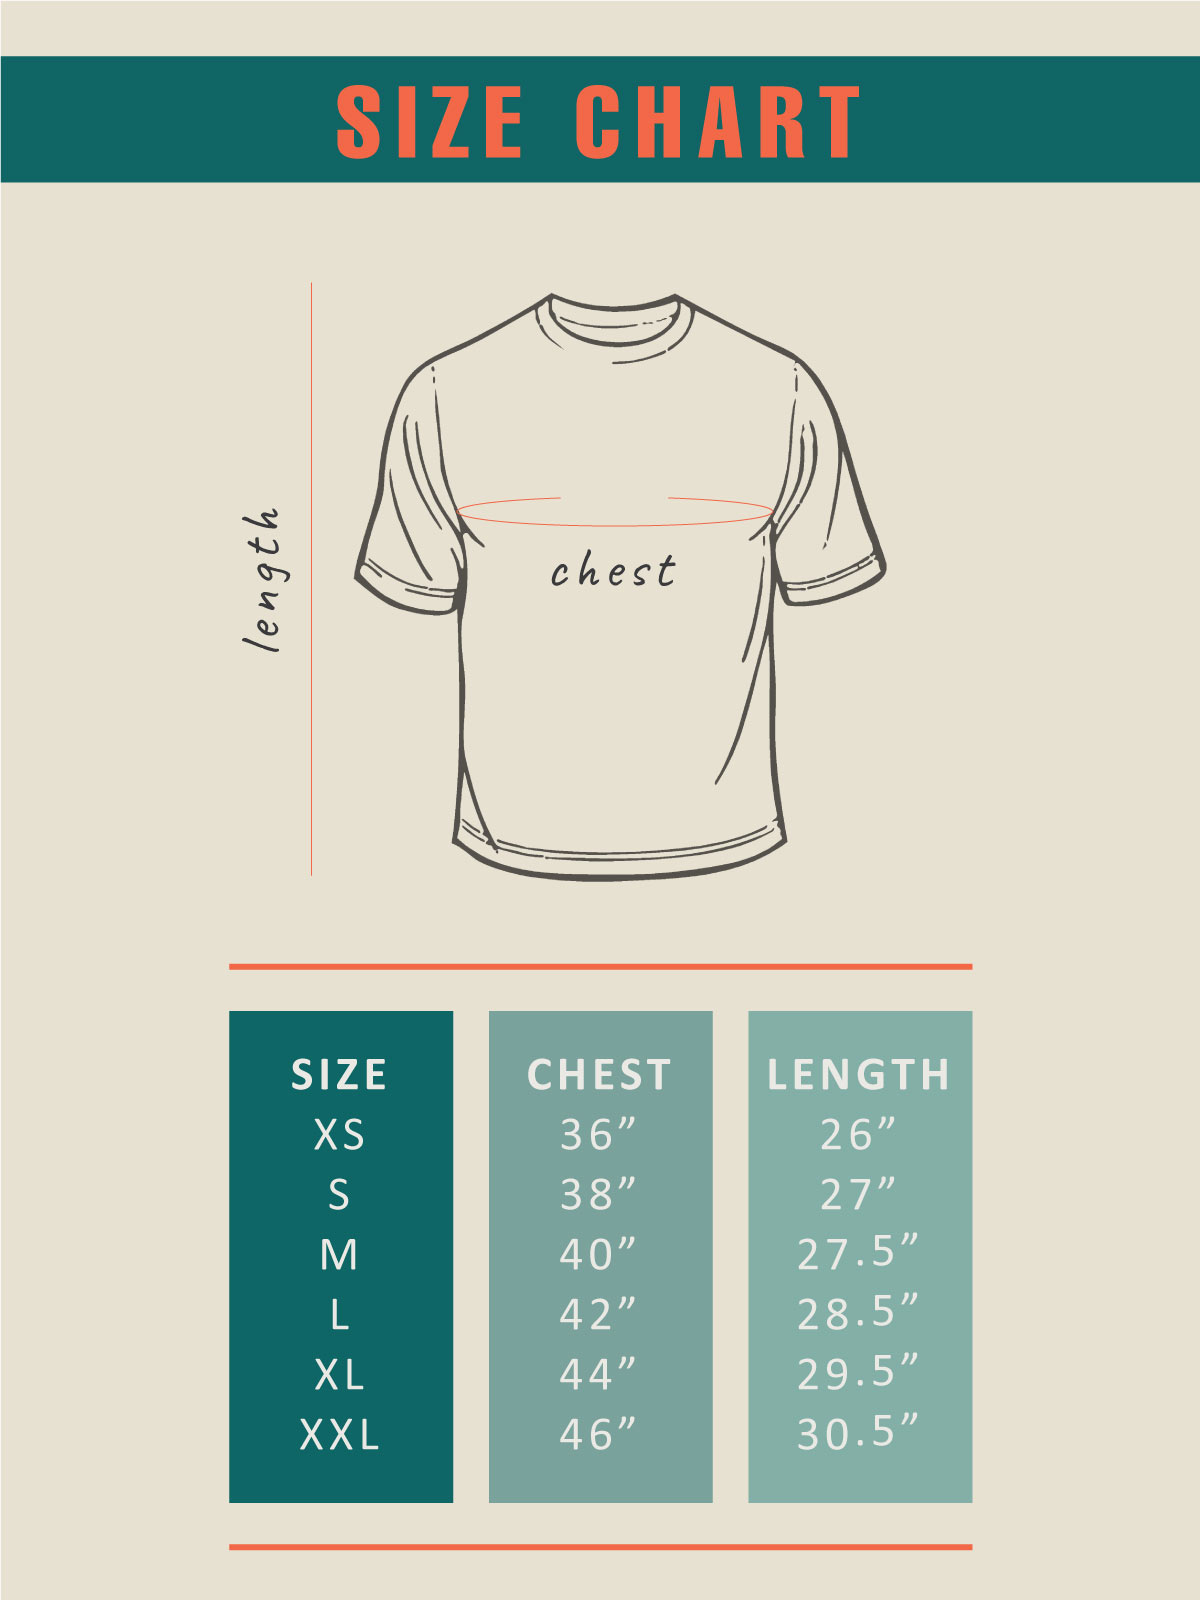 Size chart for Unisex Tshirts by shopghumakkad